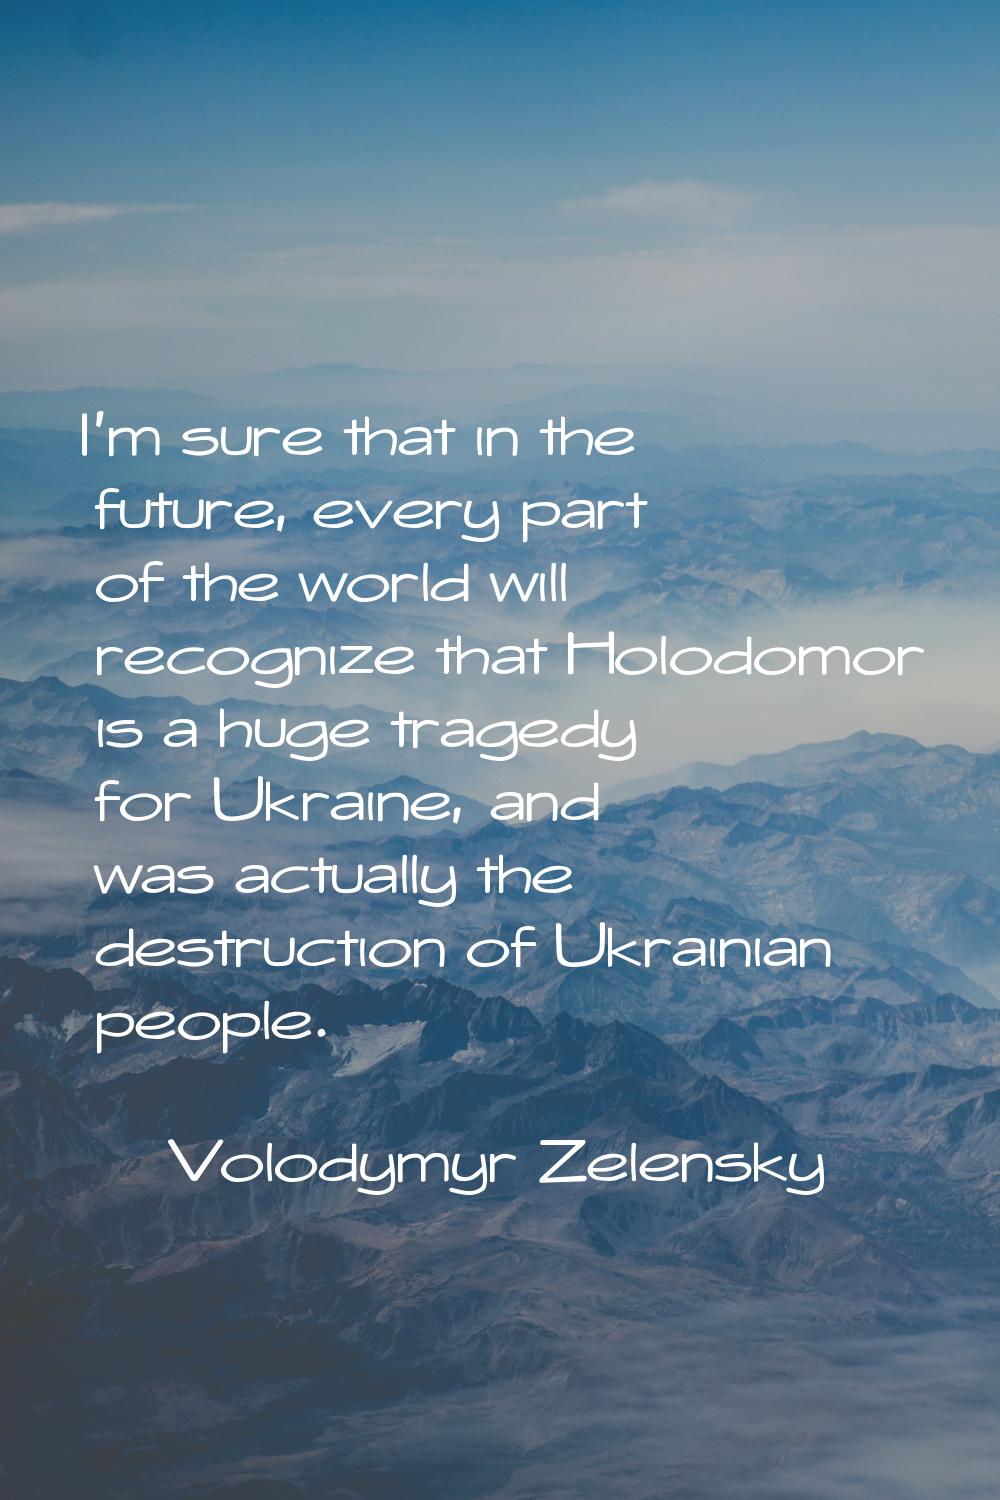 I'm sure that in the future, every part of the world will recognize that Holodomor is a huge traged